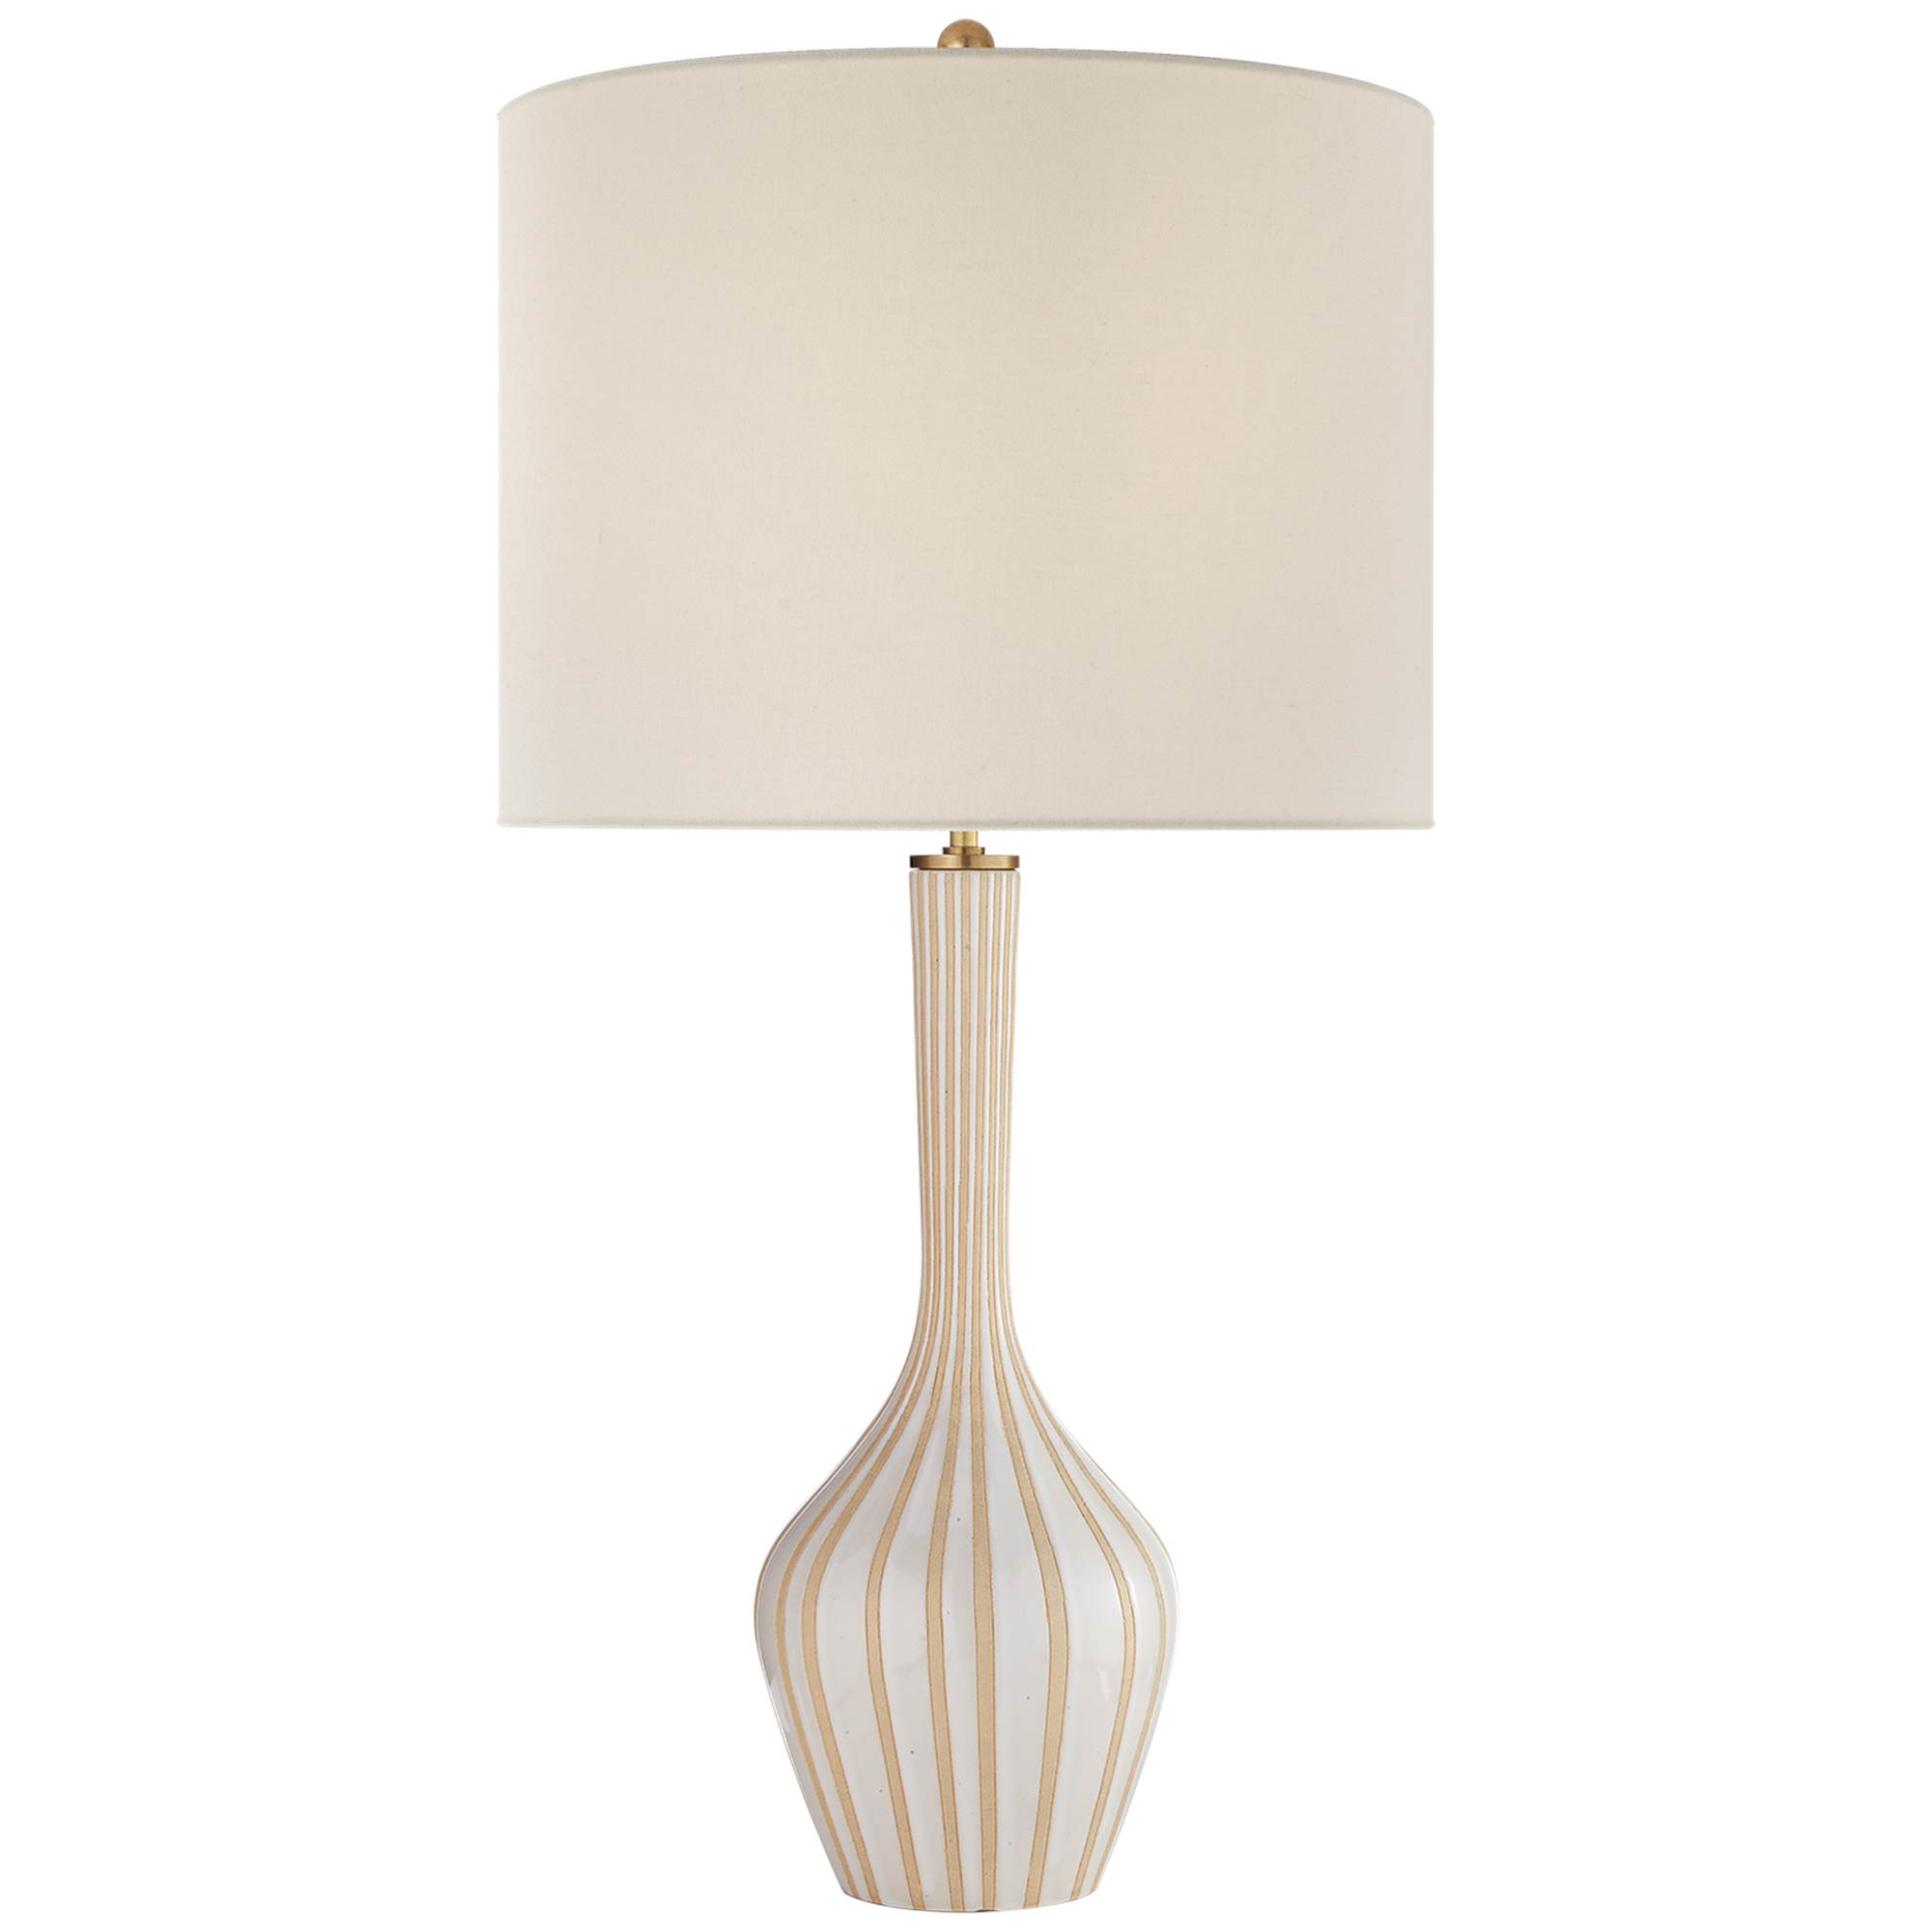 Visual Comfort Kate Spade Parkwood Large Table Lamp with Linen Shade -  Natural Bisque & New White